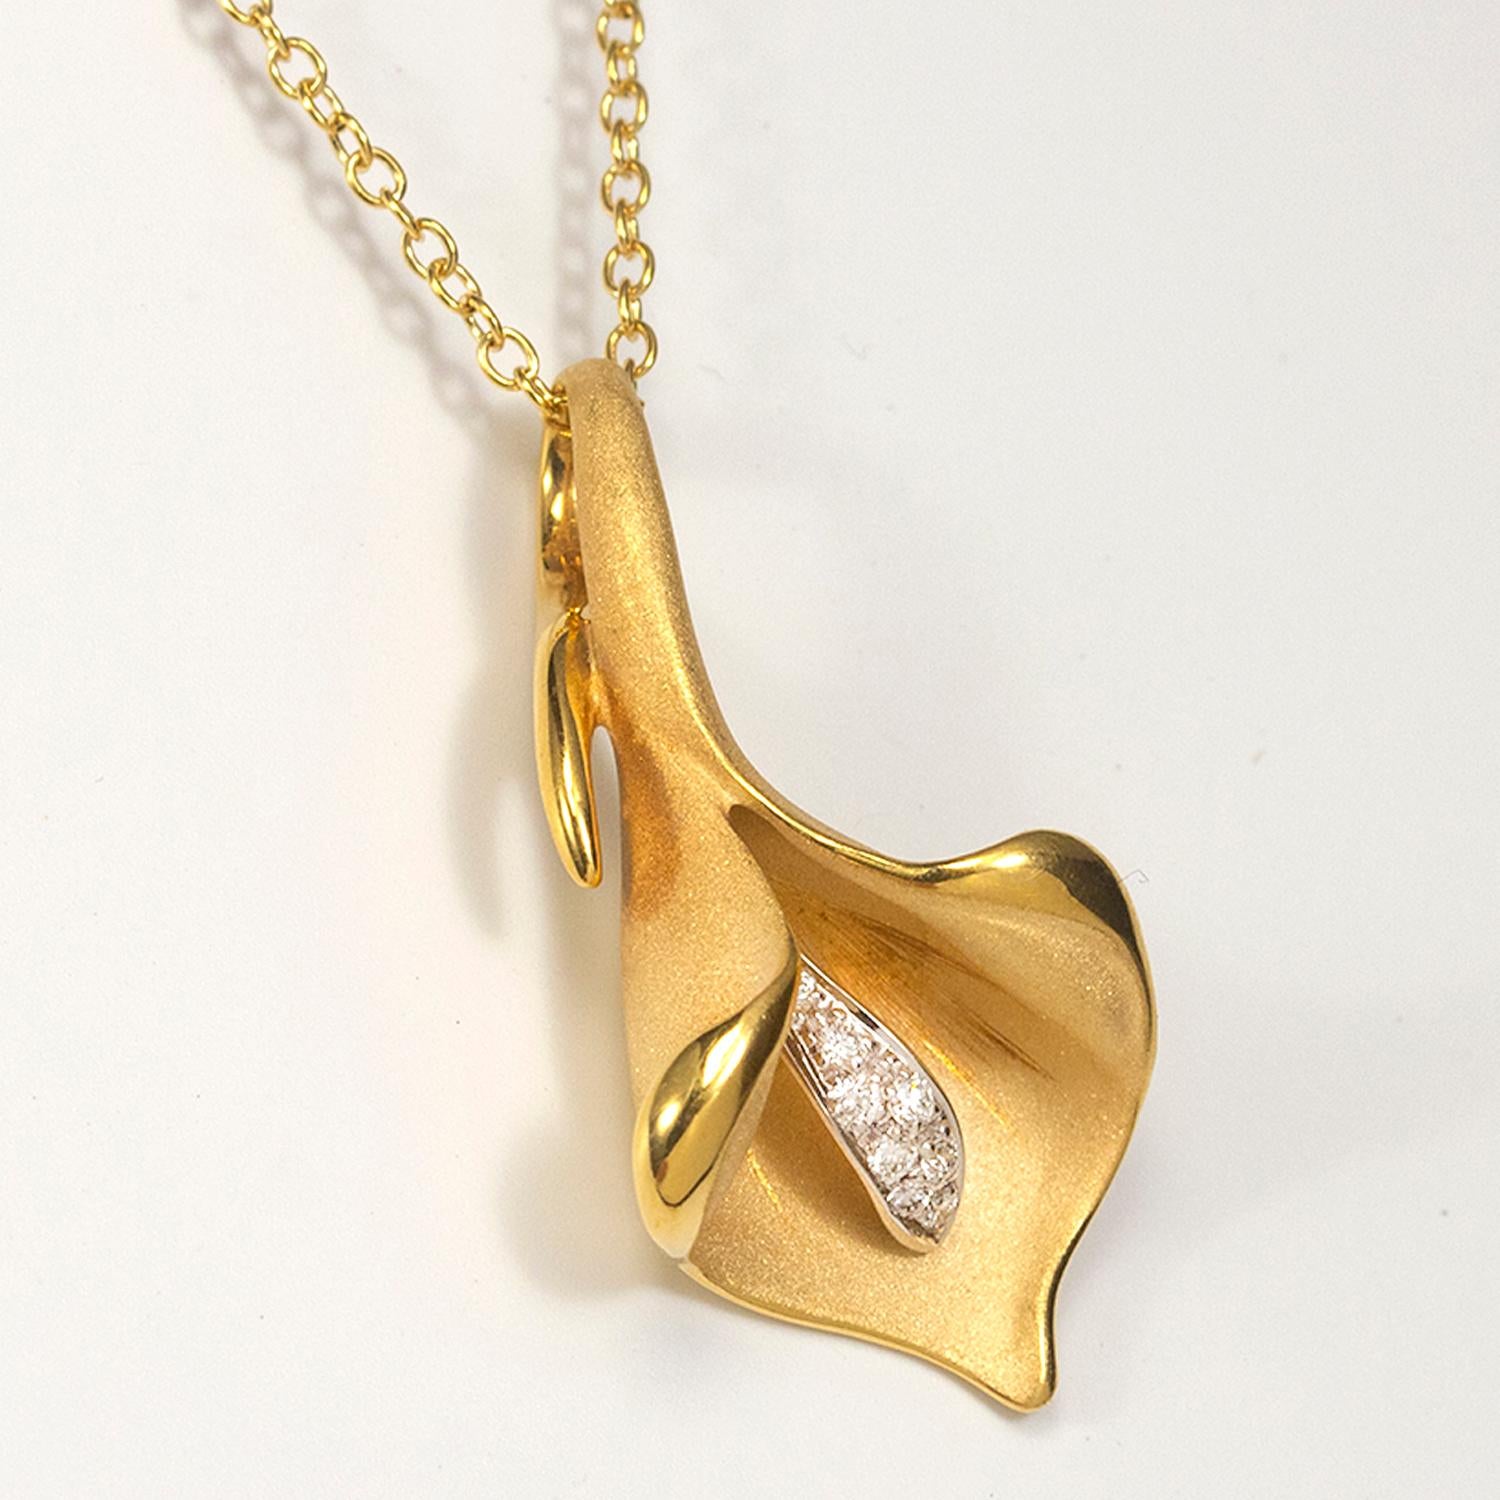 From Annamaria Cammilli's Calla collection, Calla flower shaped pendant necklace handcrafted in 18 karat Sunrise Yellow gold. Hand crafted of polished and satin textured gold, with diamonds. Diamond total weight is 0.09 carat. Pendant dimensions are